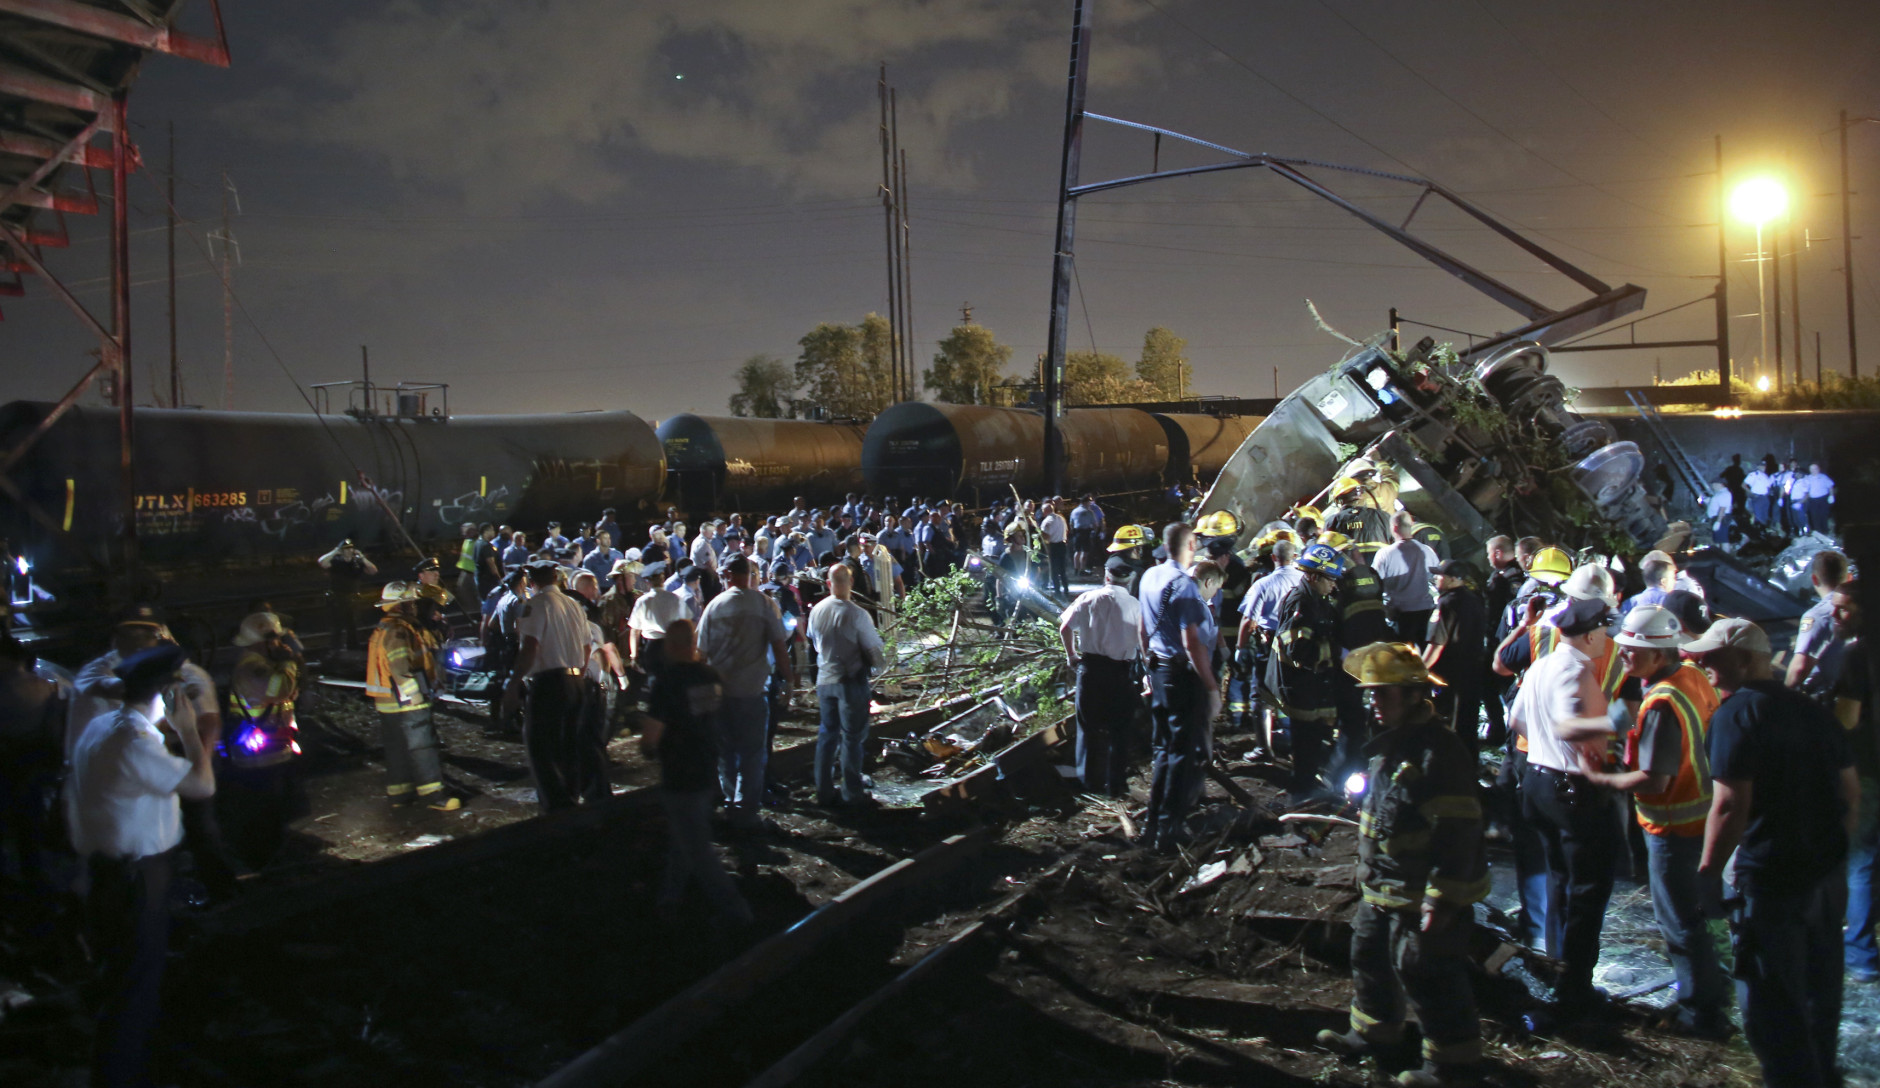 Emergency personnel work the scene of a train wreck, Tuesday, May 12, 2015, in Philadelphia. An Amtrak train headed to New York City derailed and crashed in Philadelphia. (AP Photo/ Joseph Kaczmarek)